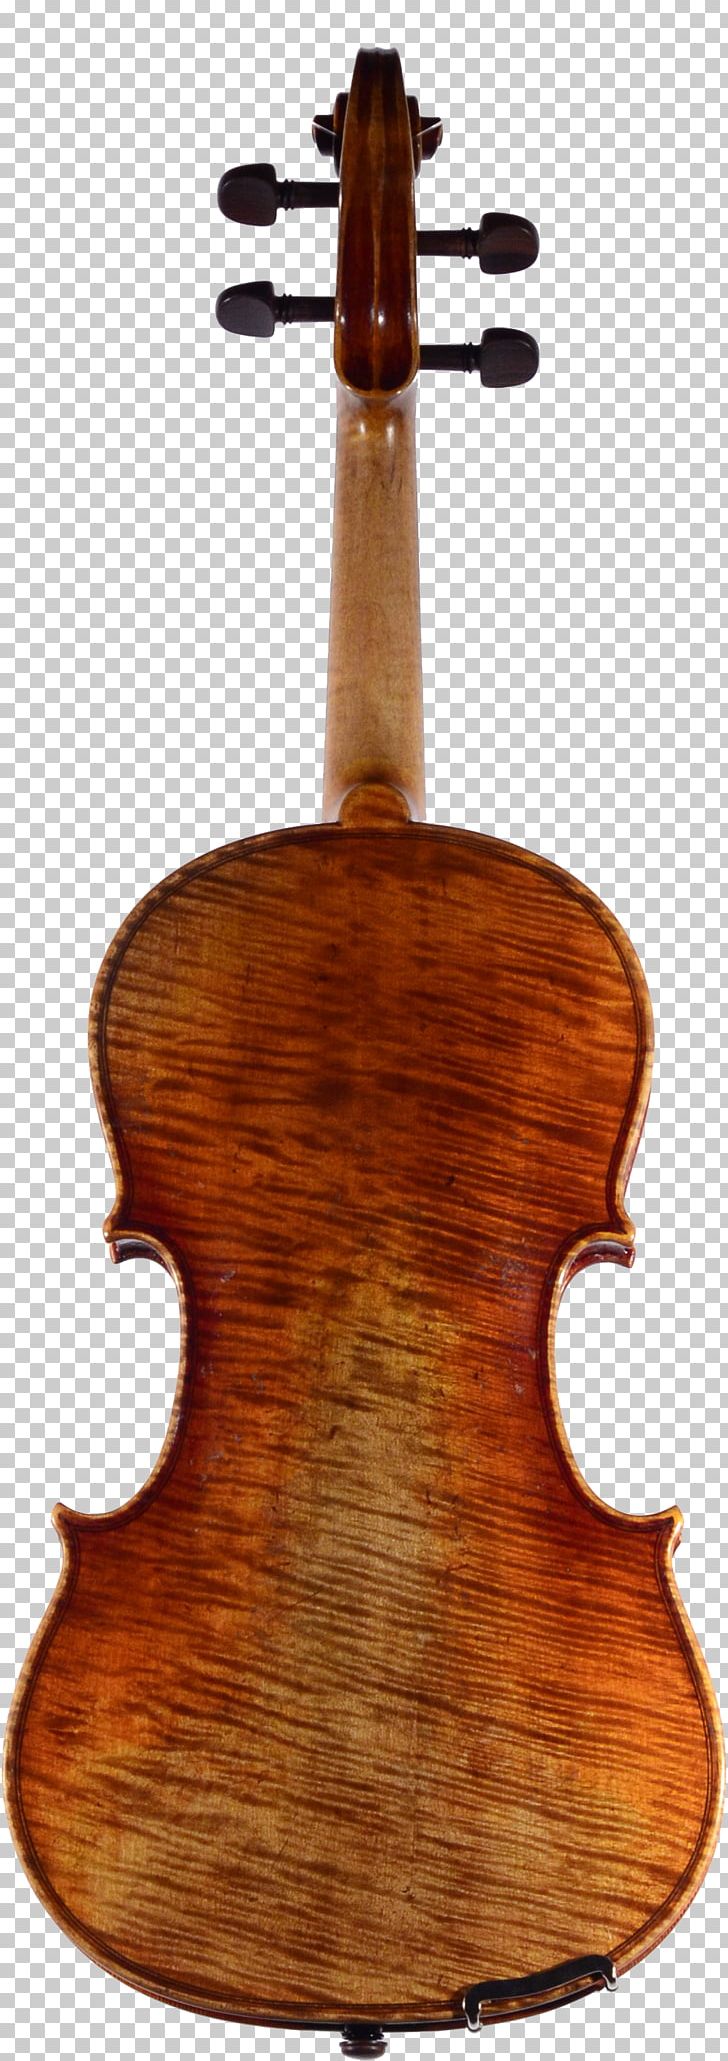 Violin Stradivarius Luthier Musical Instruments Musician PNG, Clipart, Acoustic Electric Guitar, Amati, Antonio Stradivari, Bass Violin, Musical Instrument Free PNG Download